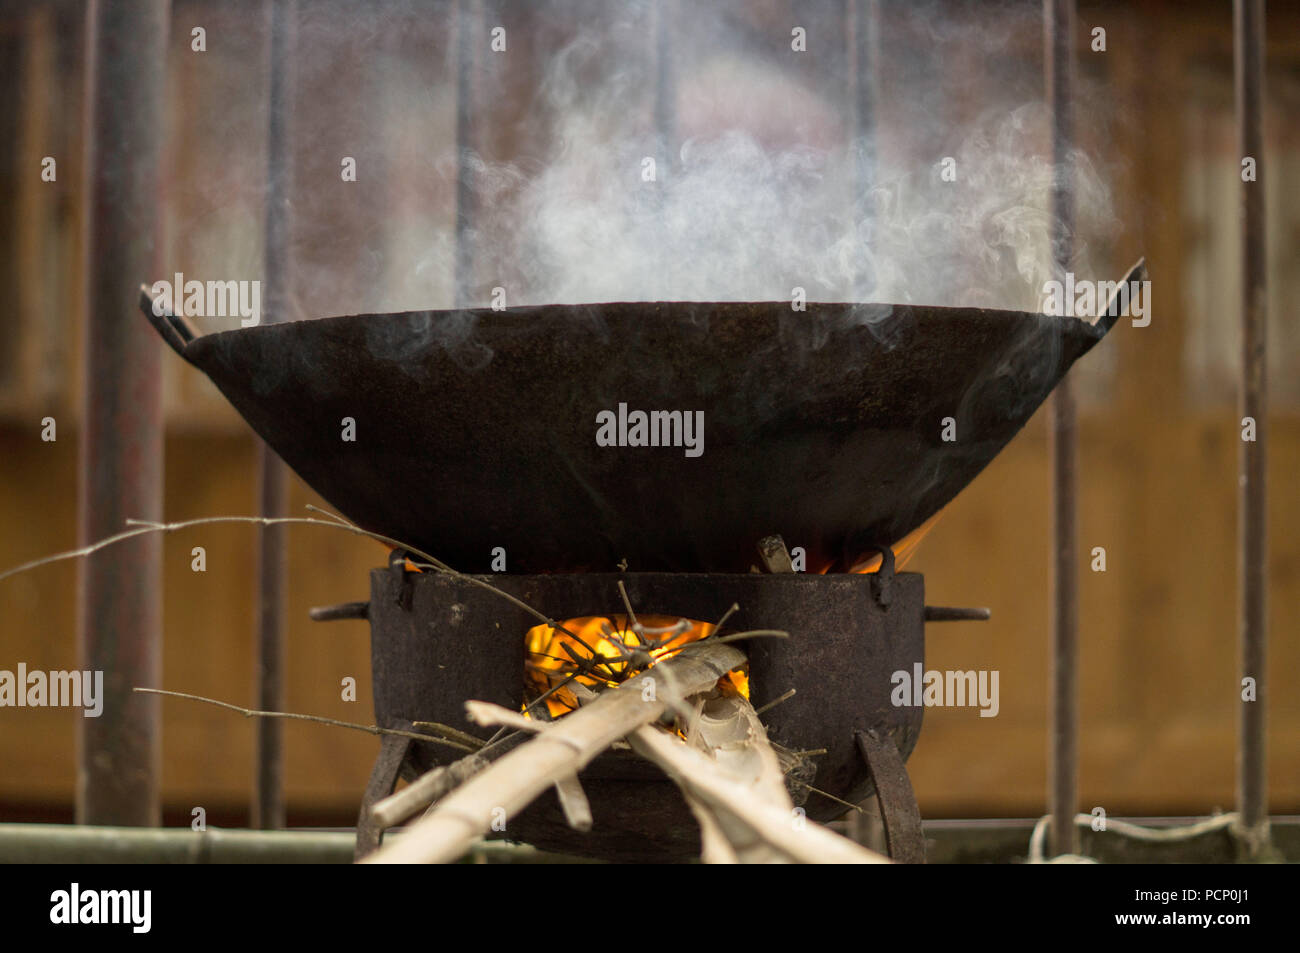 A big, traditional wok on an open fire Stock Photo